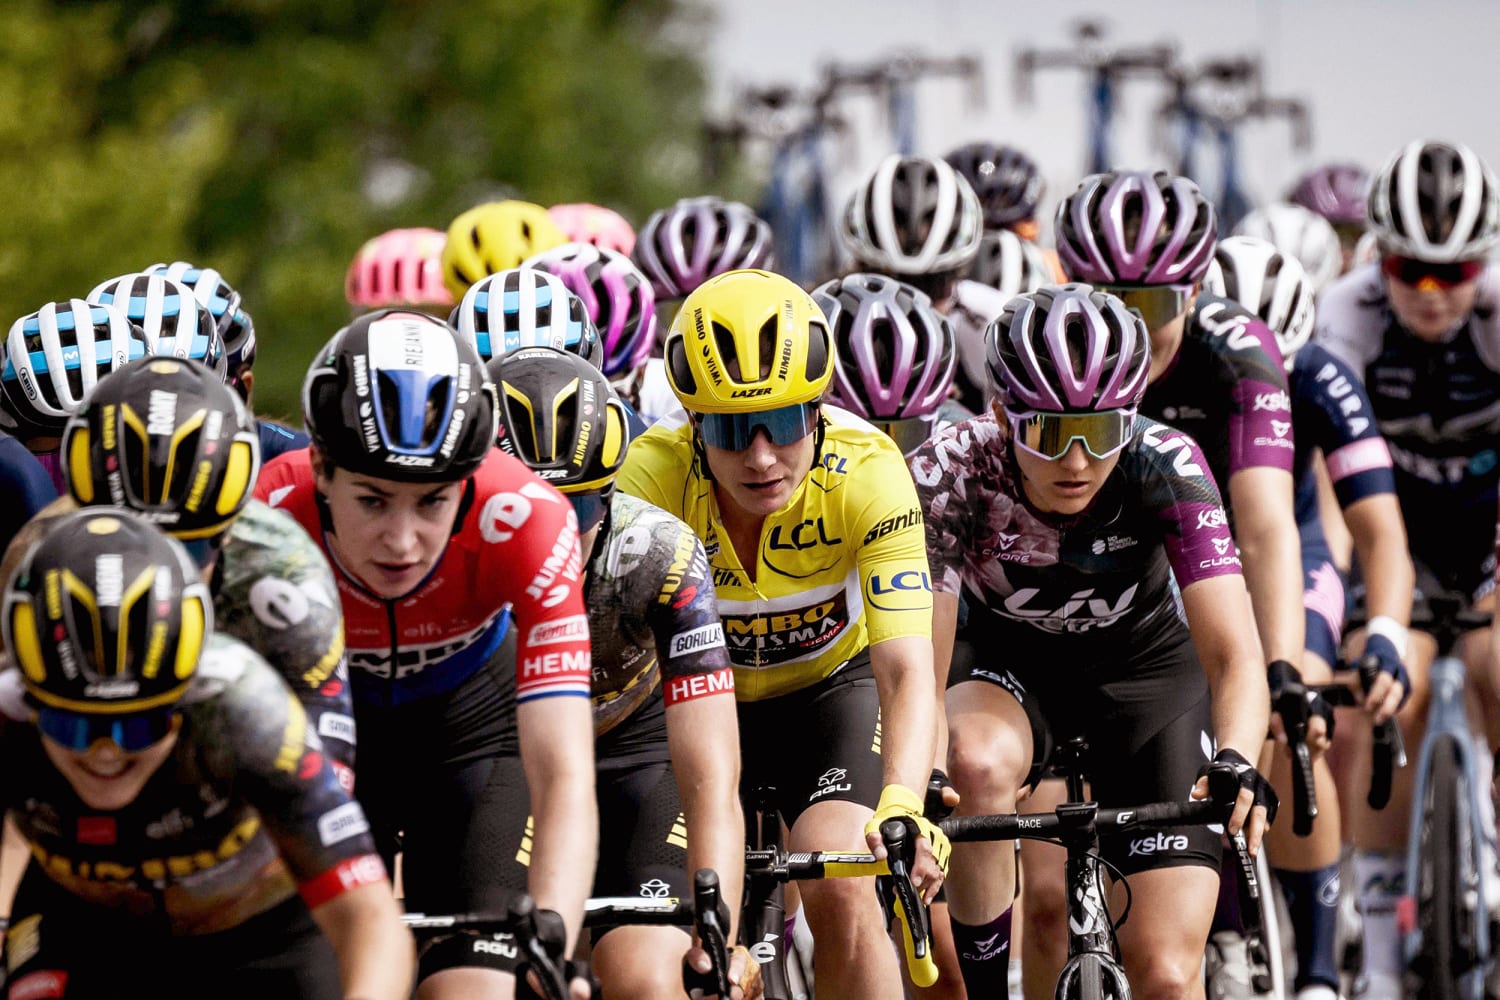 Women are back in the Tour de France, but the race toward equity remains